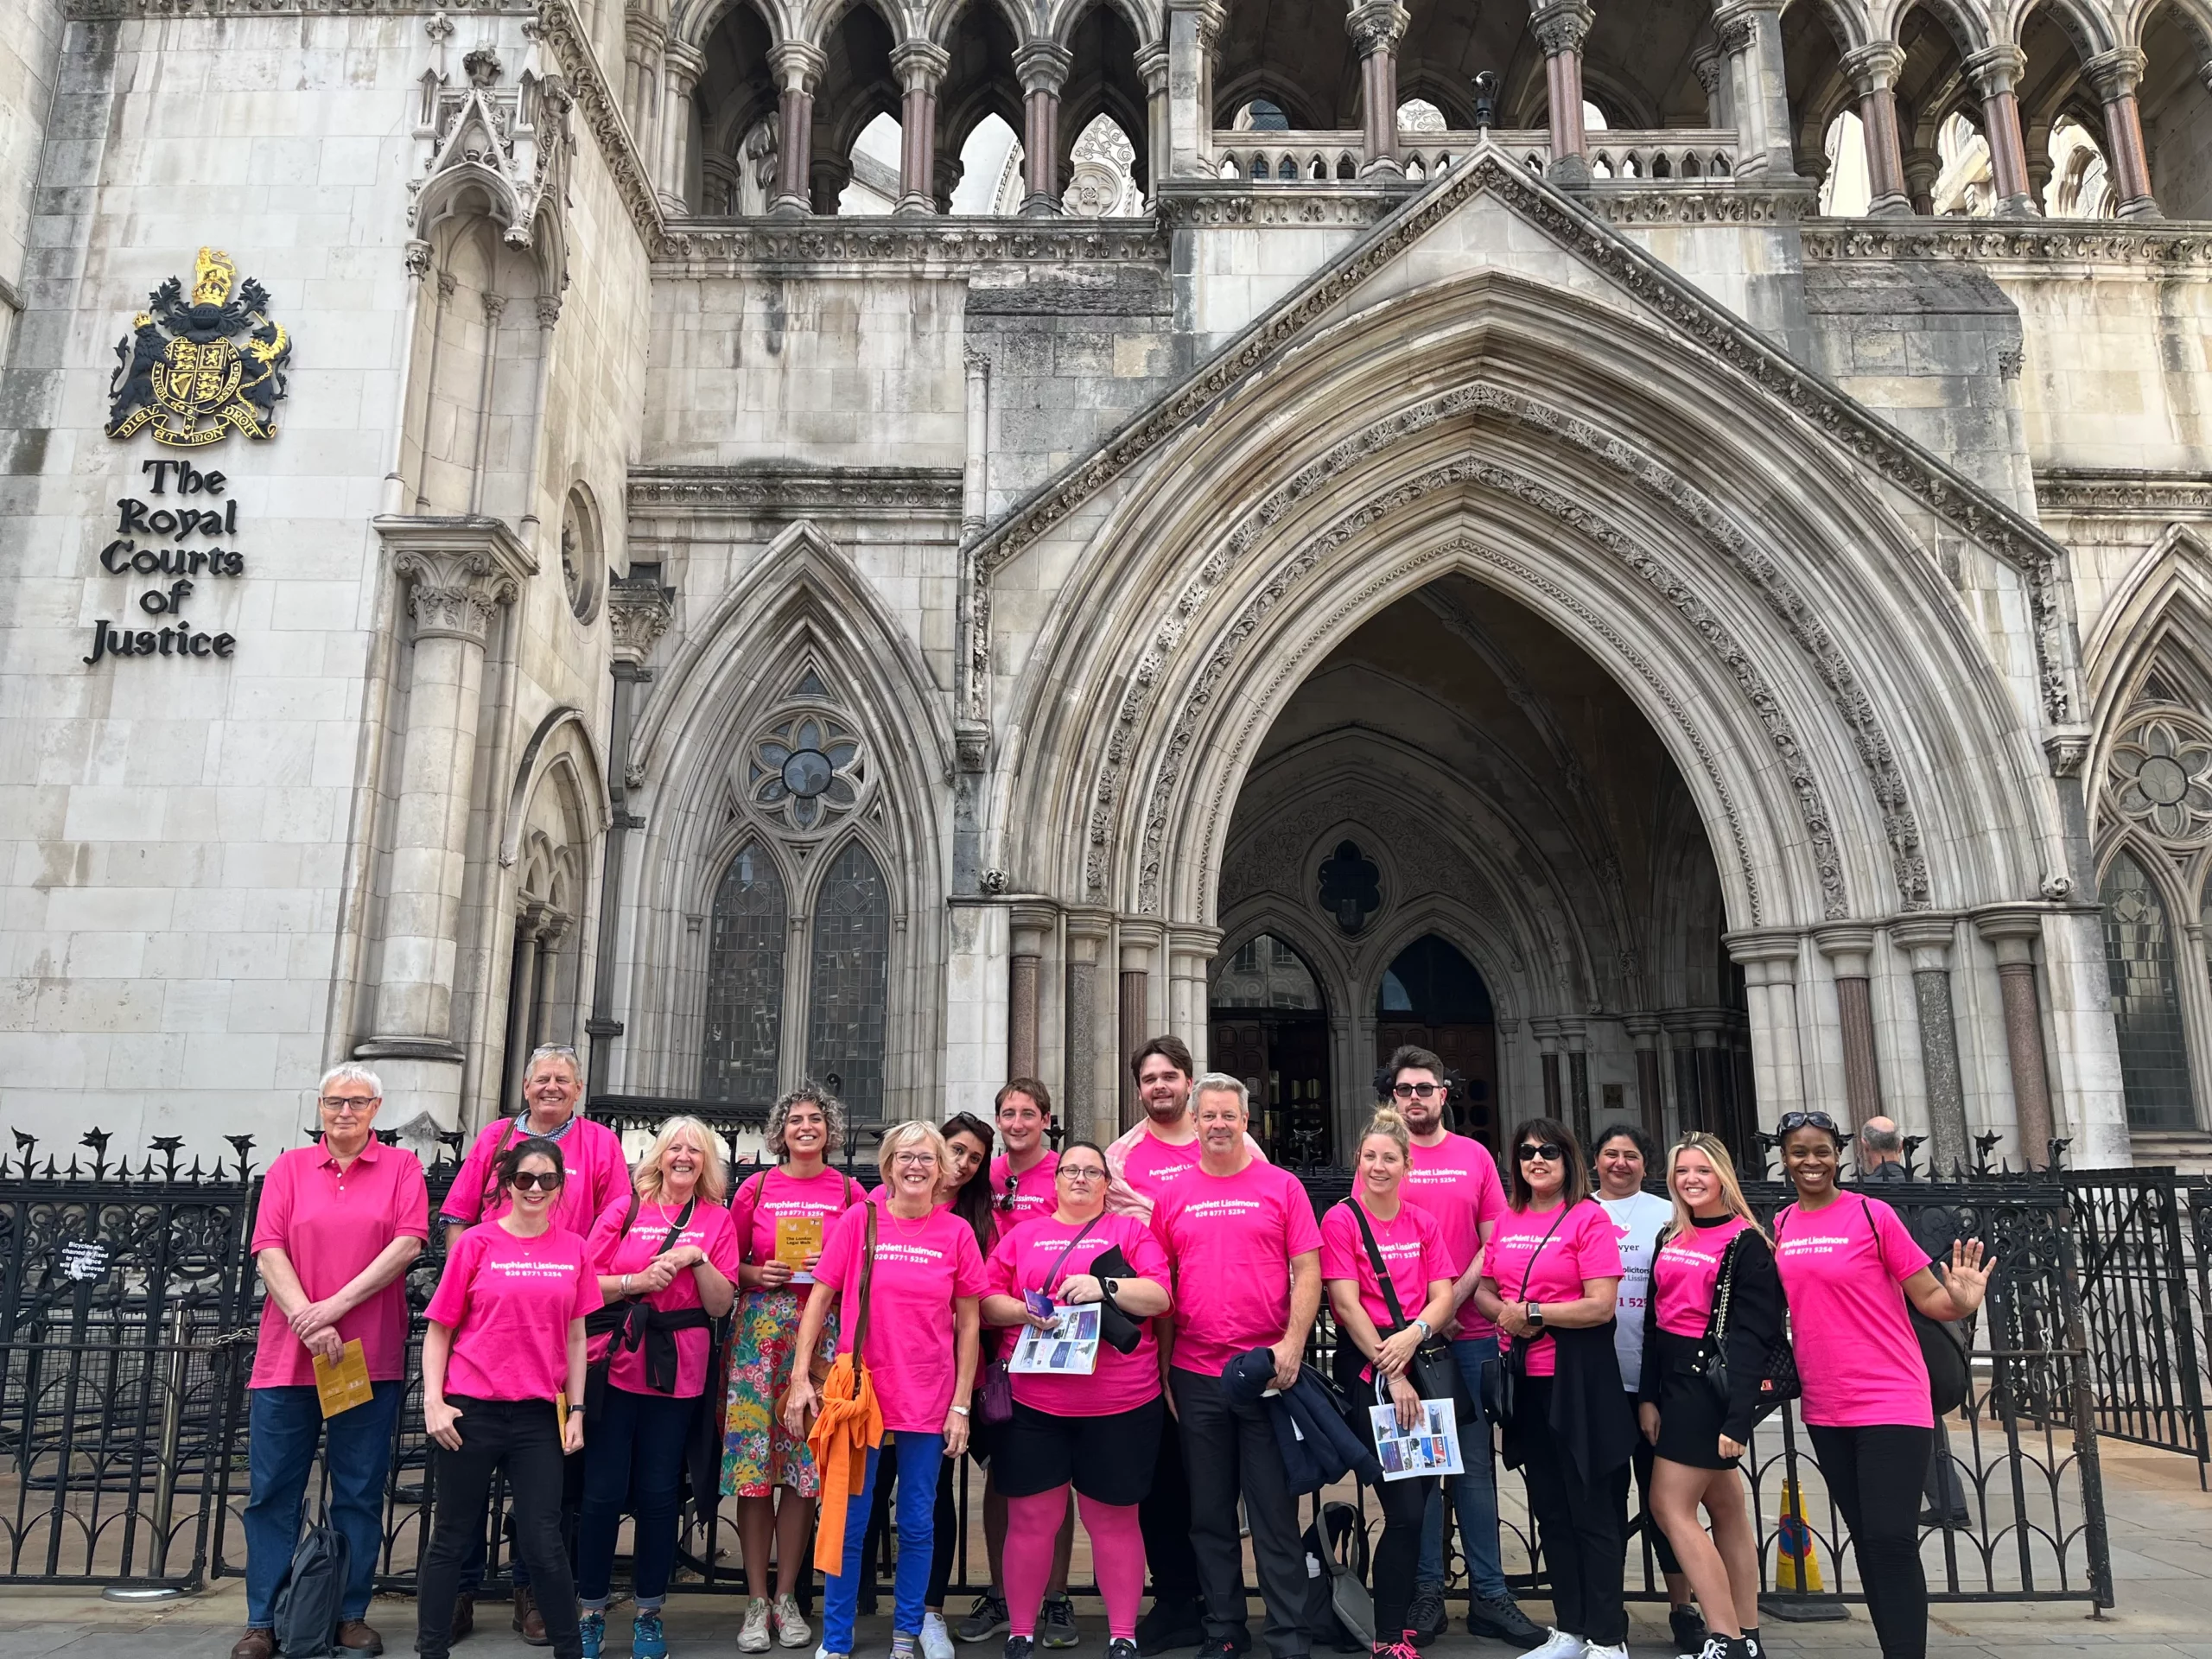 Team Amphlett Lissimore outside the Royal Courts of Justice during the London legal walk